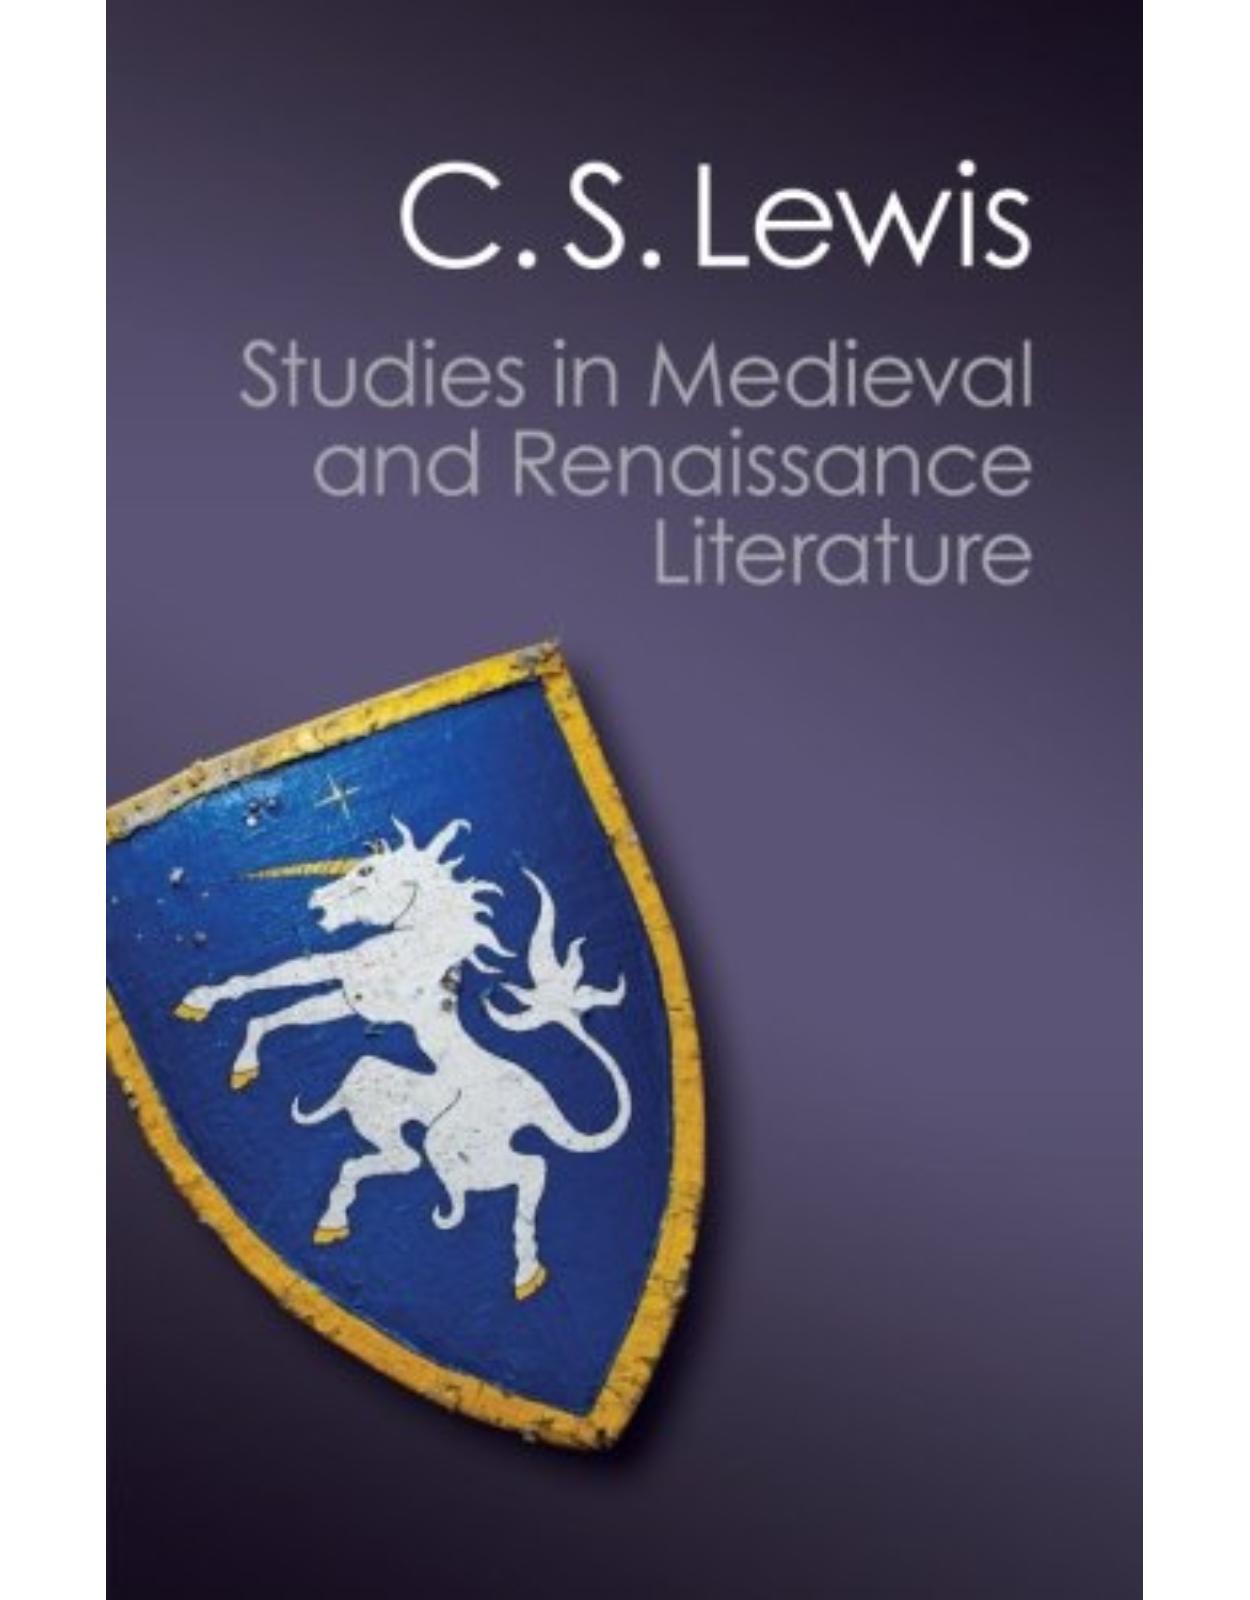 Studies in Medieval and Renaissance Literature (Canto Classics)